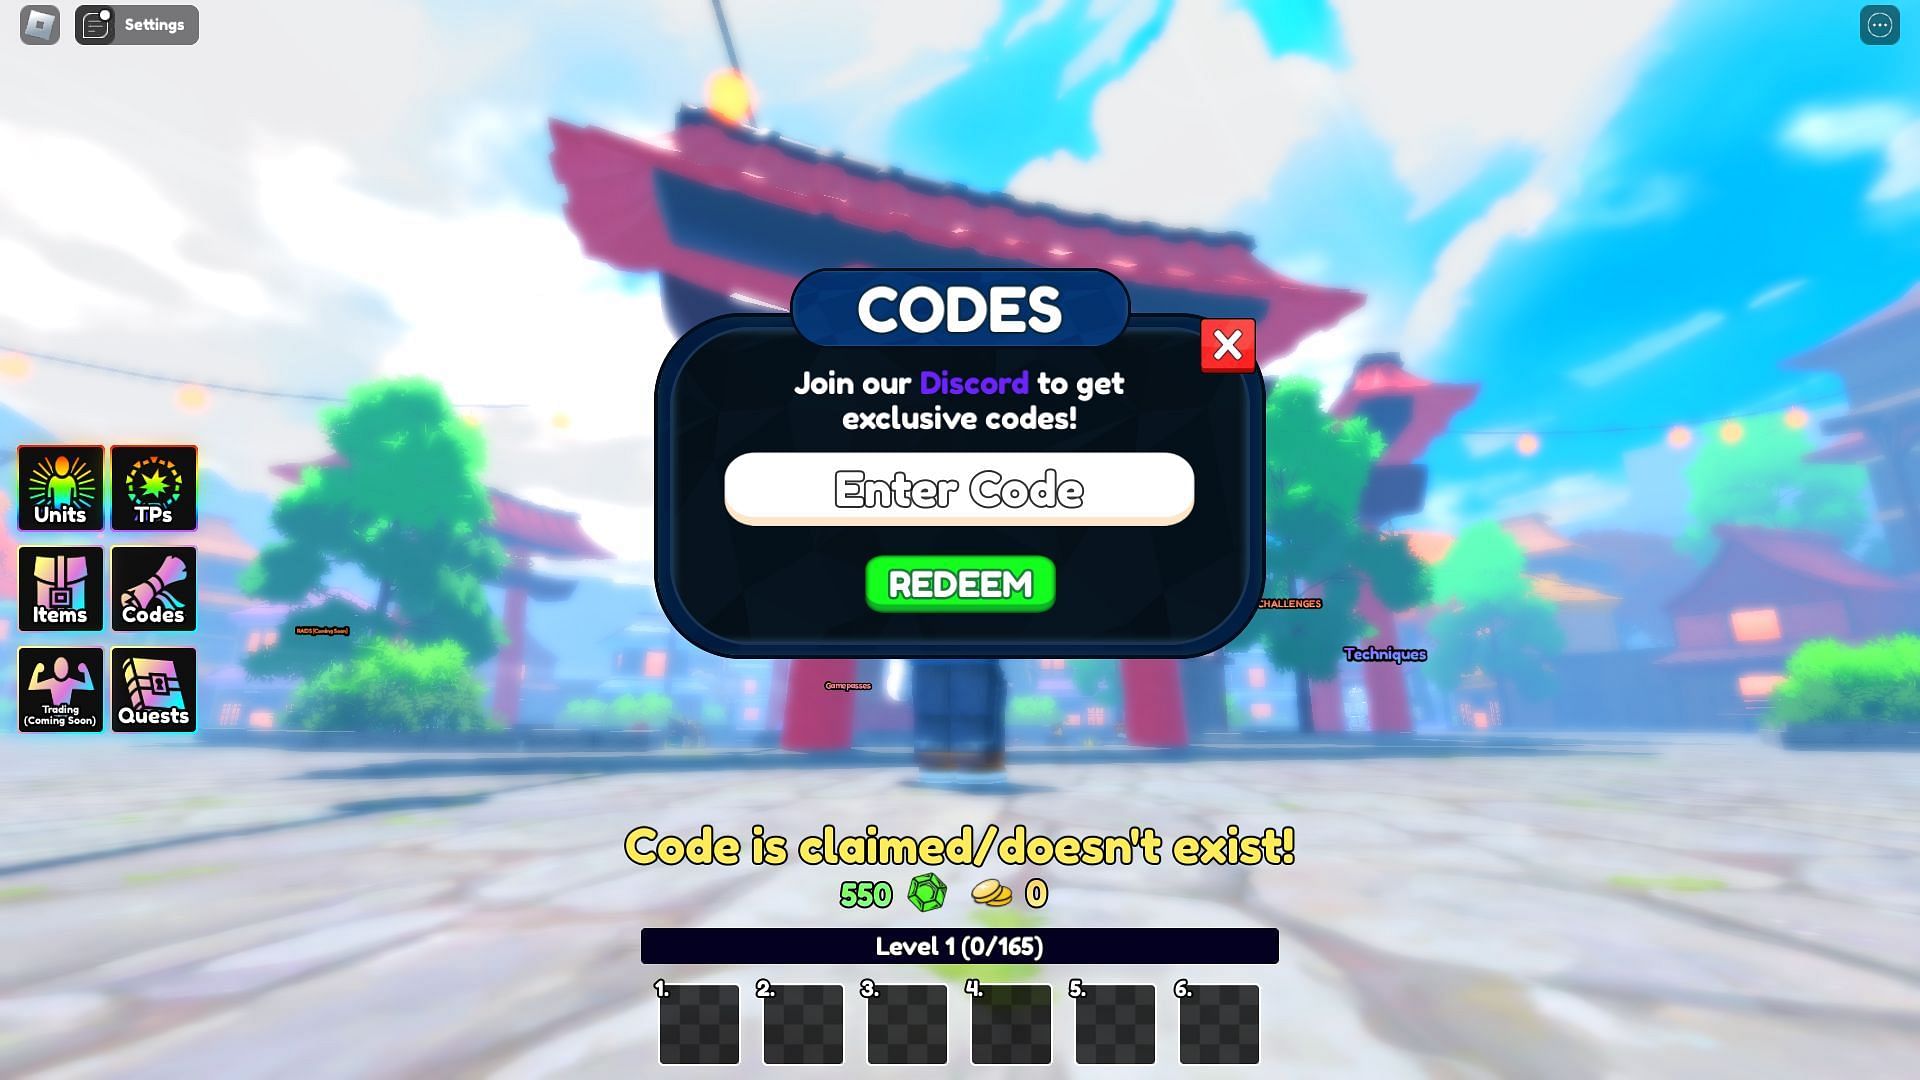 Troubleshooting codes for Anime Last Stand (Image via Roblox)